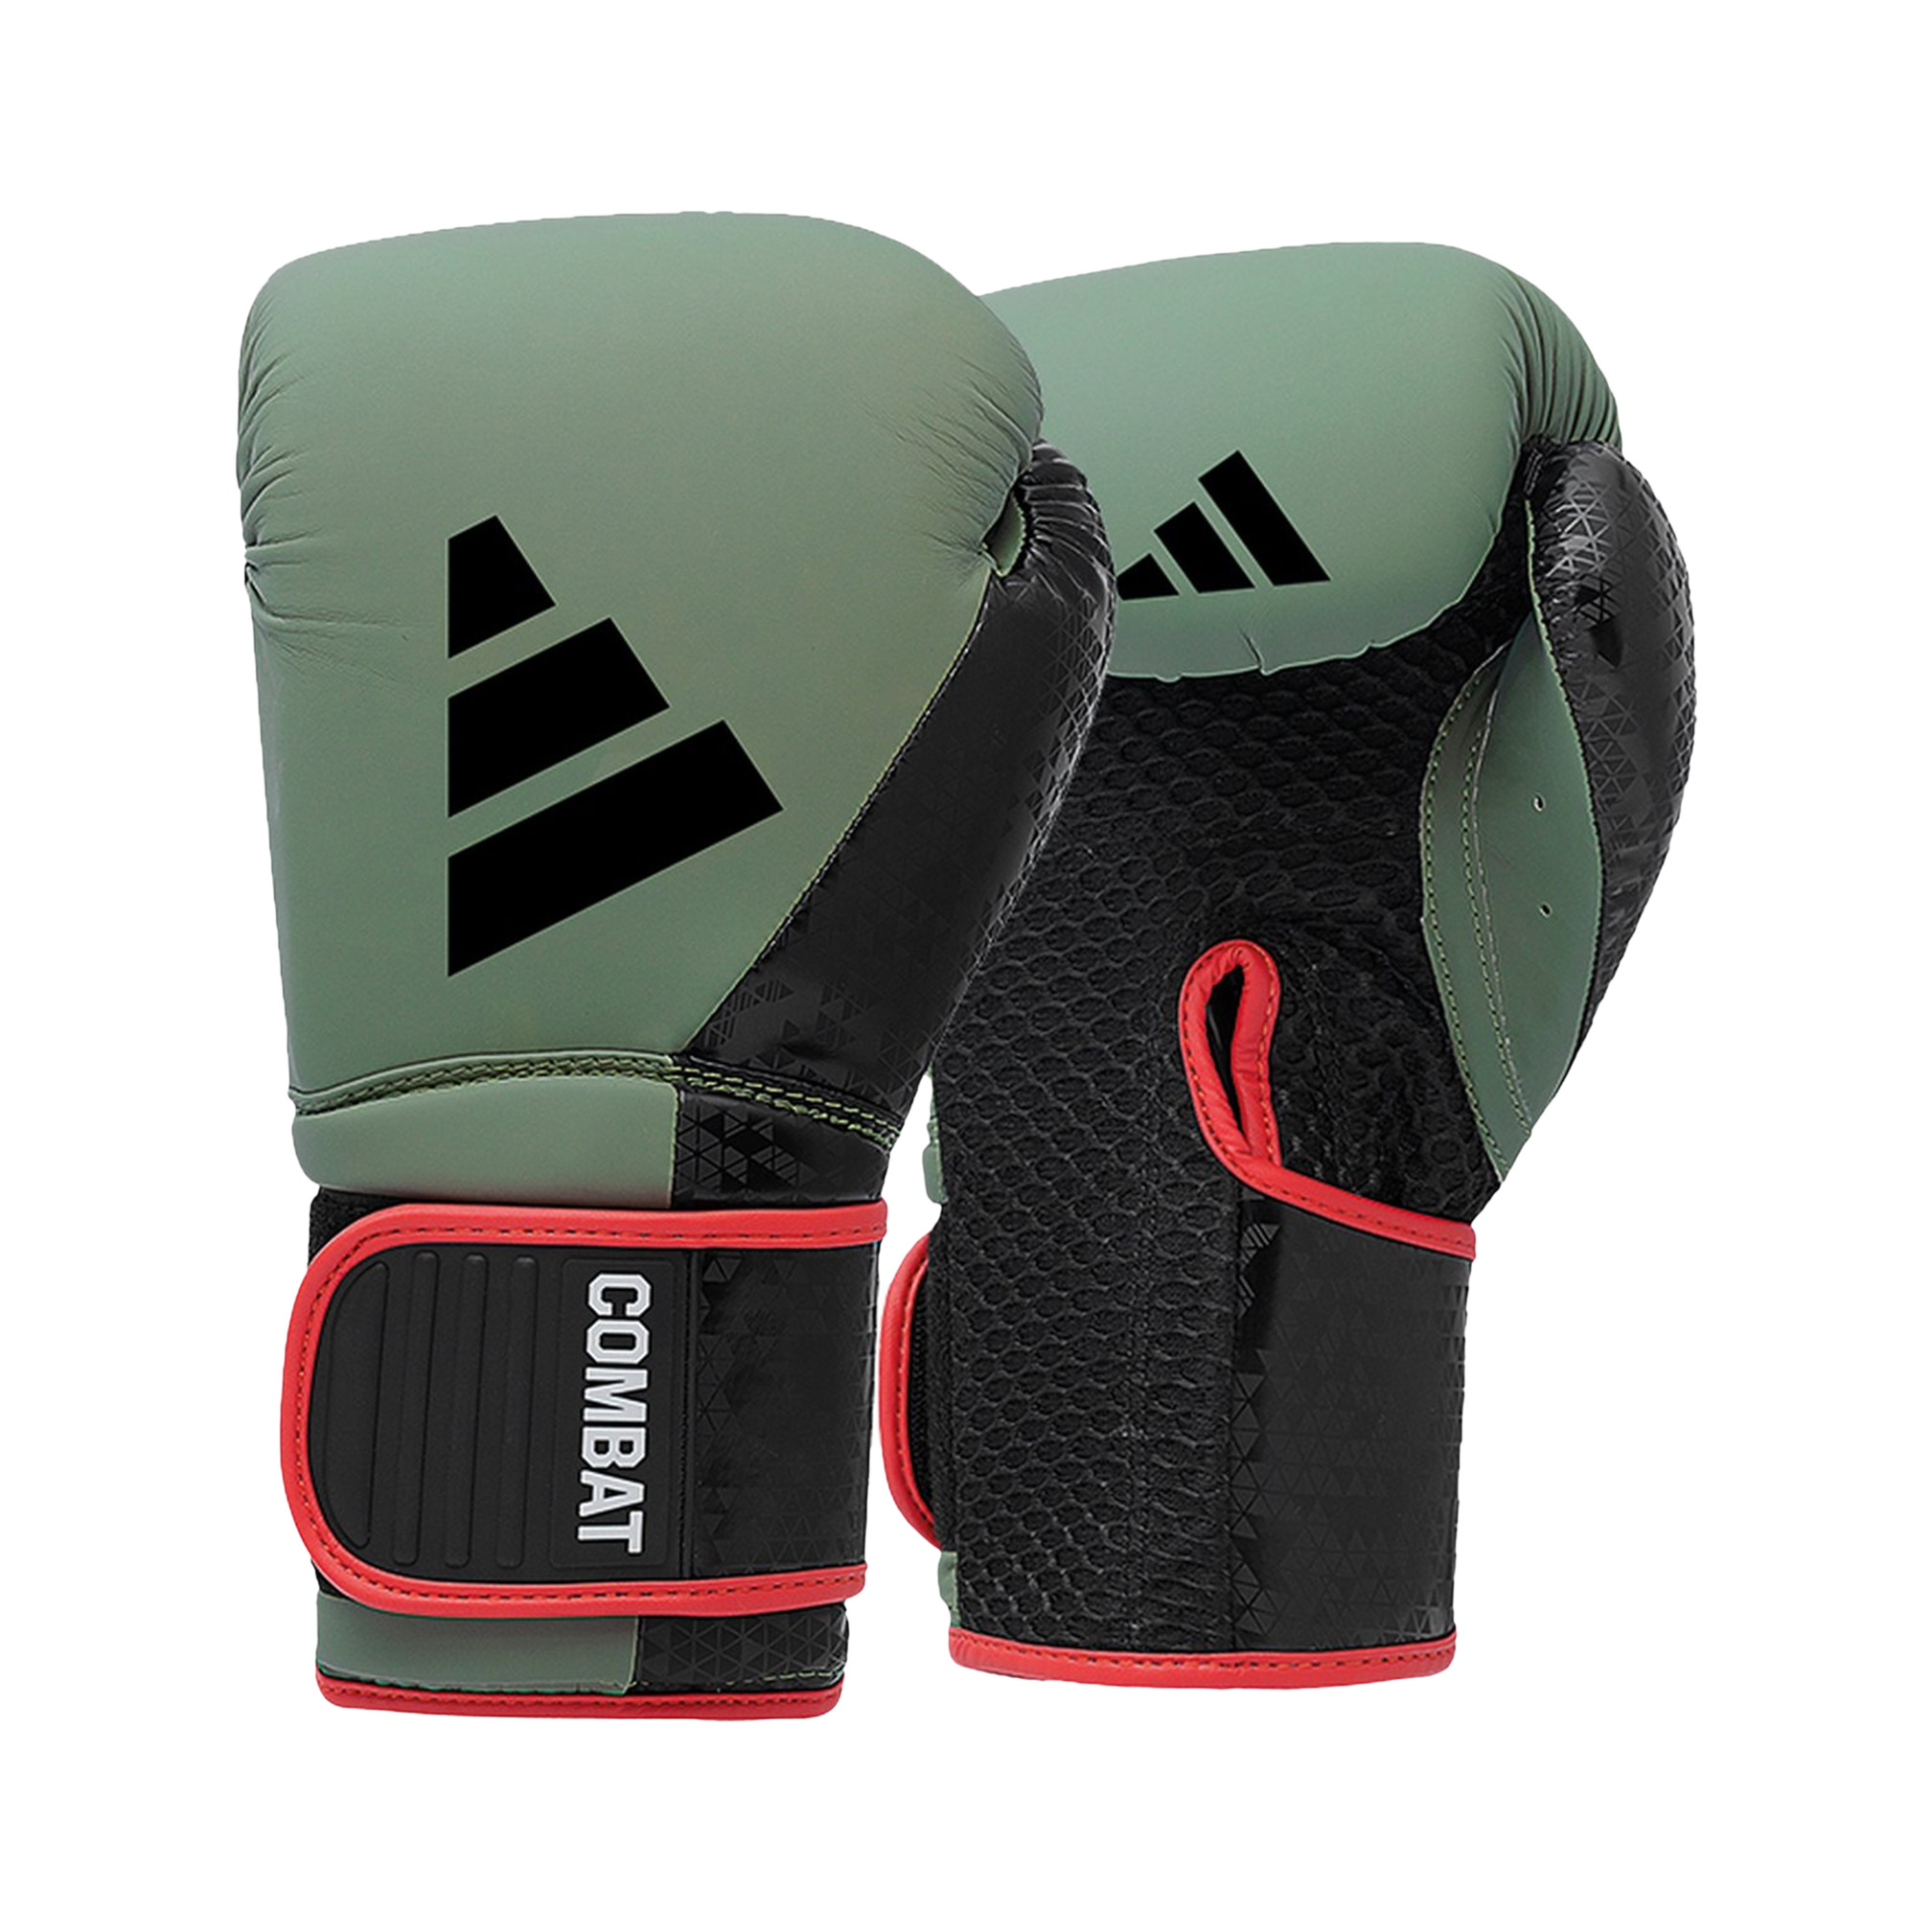 Adidas Combat 50 Boxing Gloves, beginners 12 oz